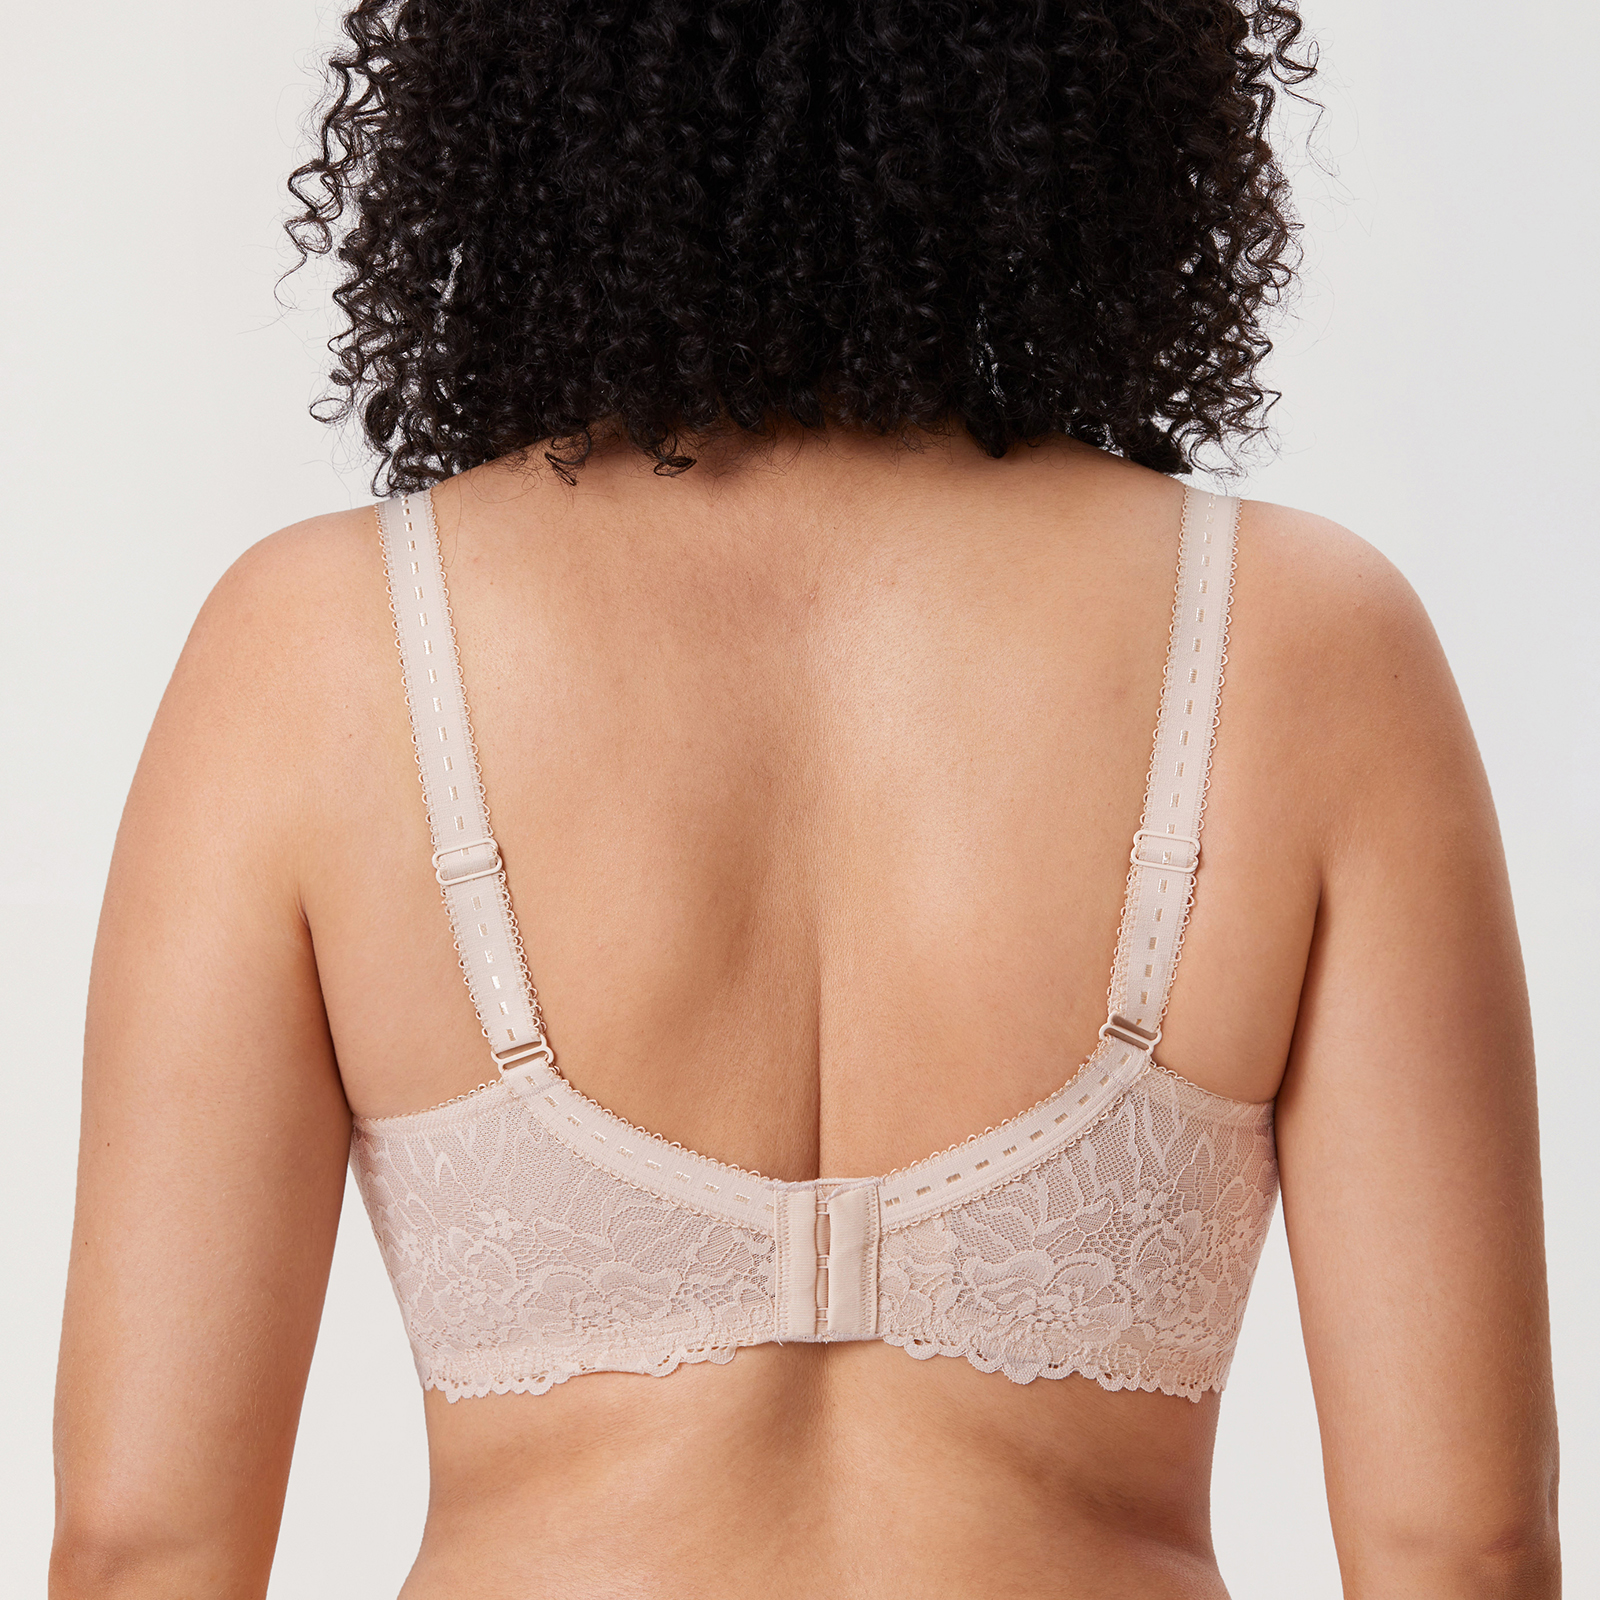 Delimira Plus Size Seamless Bra Smooth, Full Rubenesque Figure, Underwire,  Comfortable Minimizer For Women 210623 From Dou01, $11.95